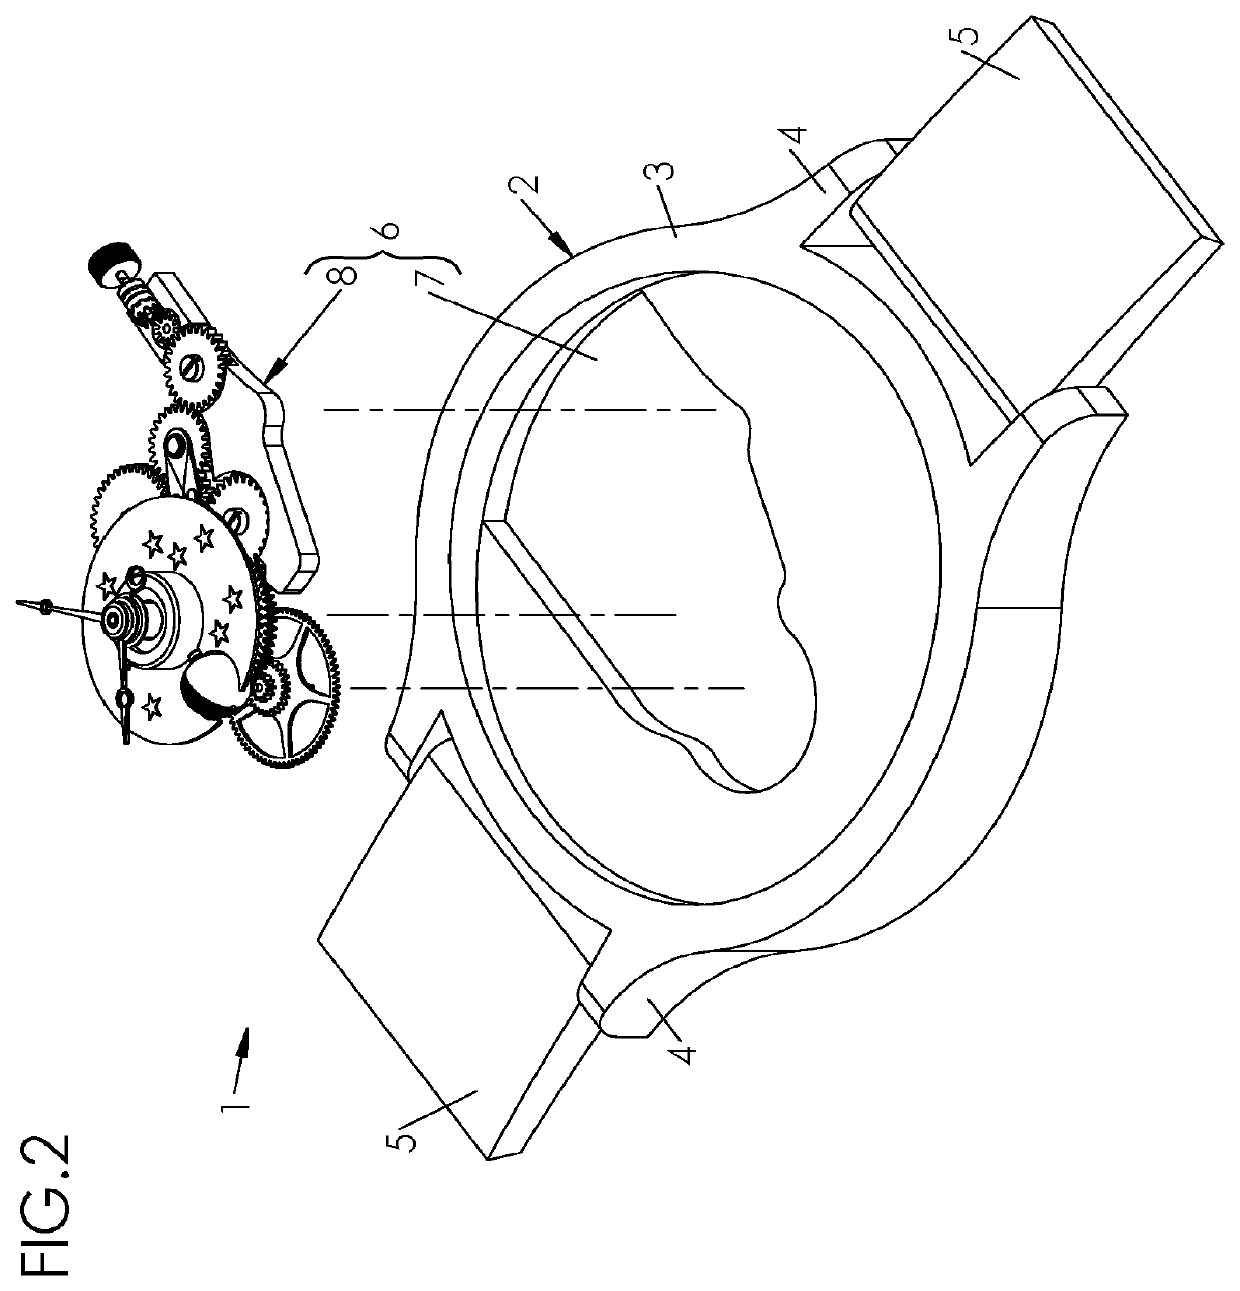 Timepiece mechanism for displaying the lunar day and moon phase, with a correction system using a double kinematic chain